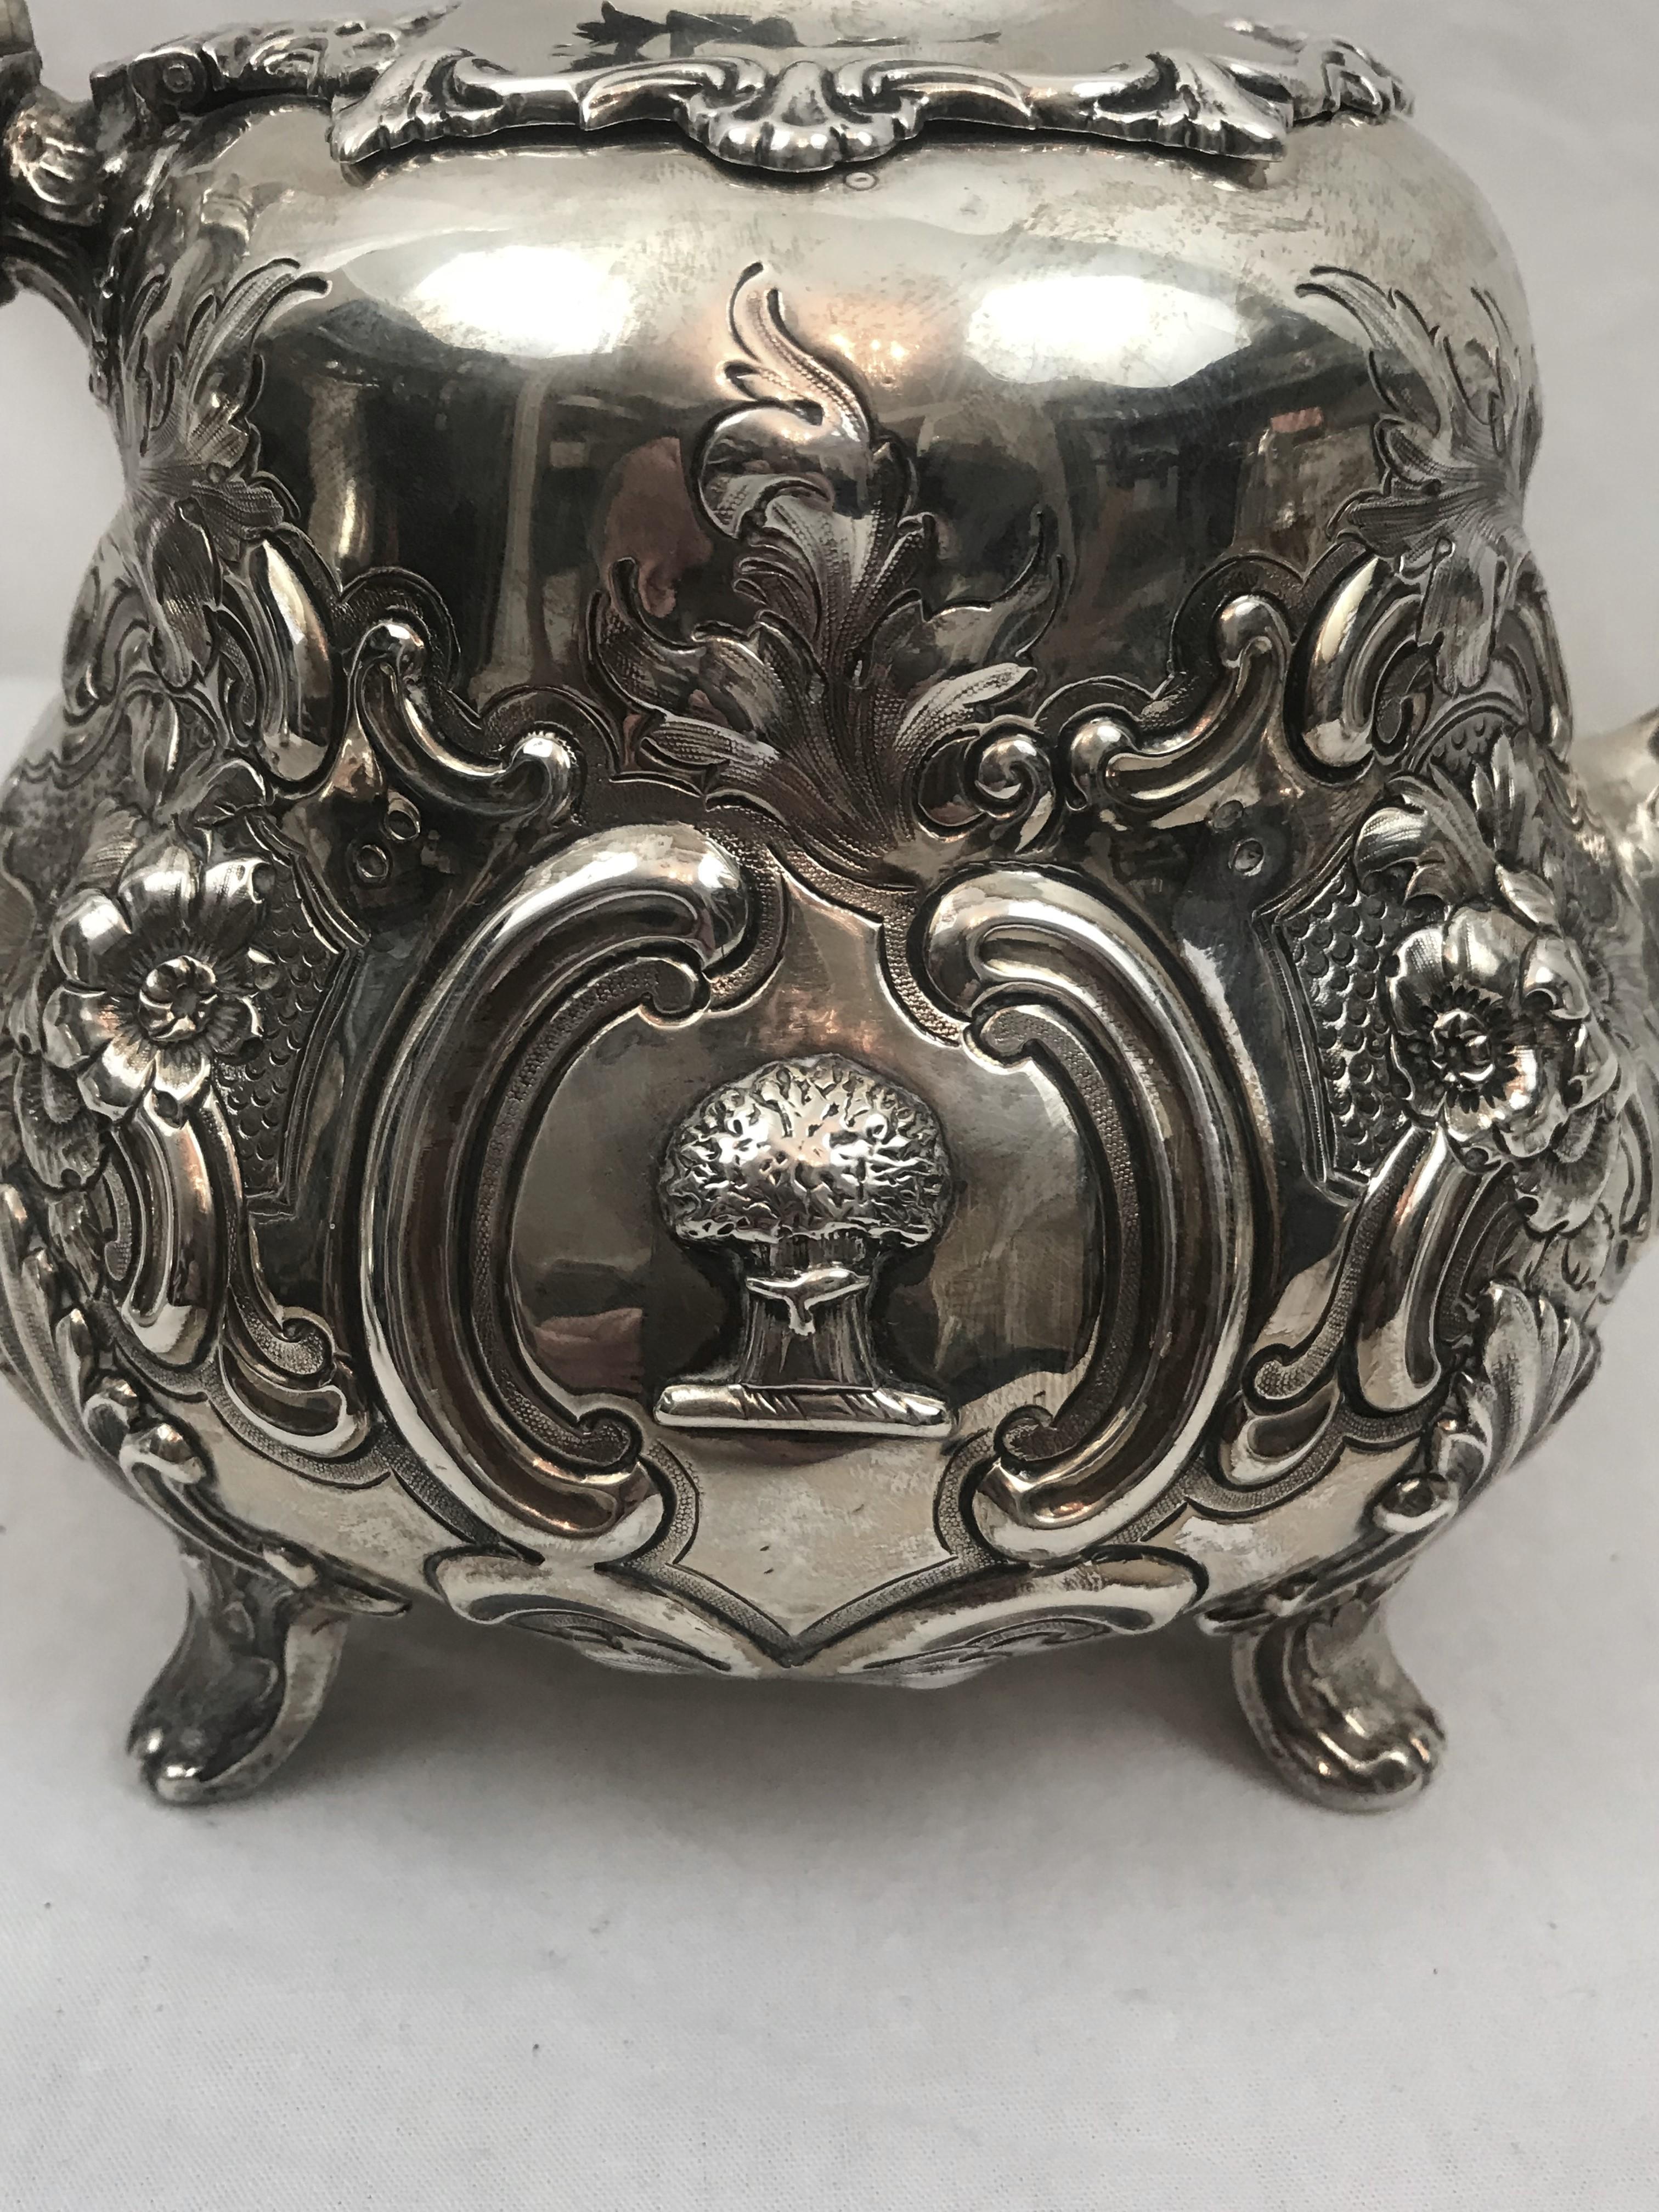 English sterling silver footed teapot. 
Date mark London 1855. Maker's mark William Hunter.
 
Heavily repoussed flowers and scrolling leaves. Flower finial. 
Unusual applied family crest of a tree or sheath of wheat.
Bone insulators.
